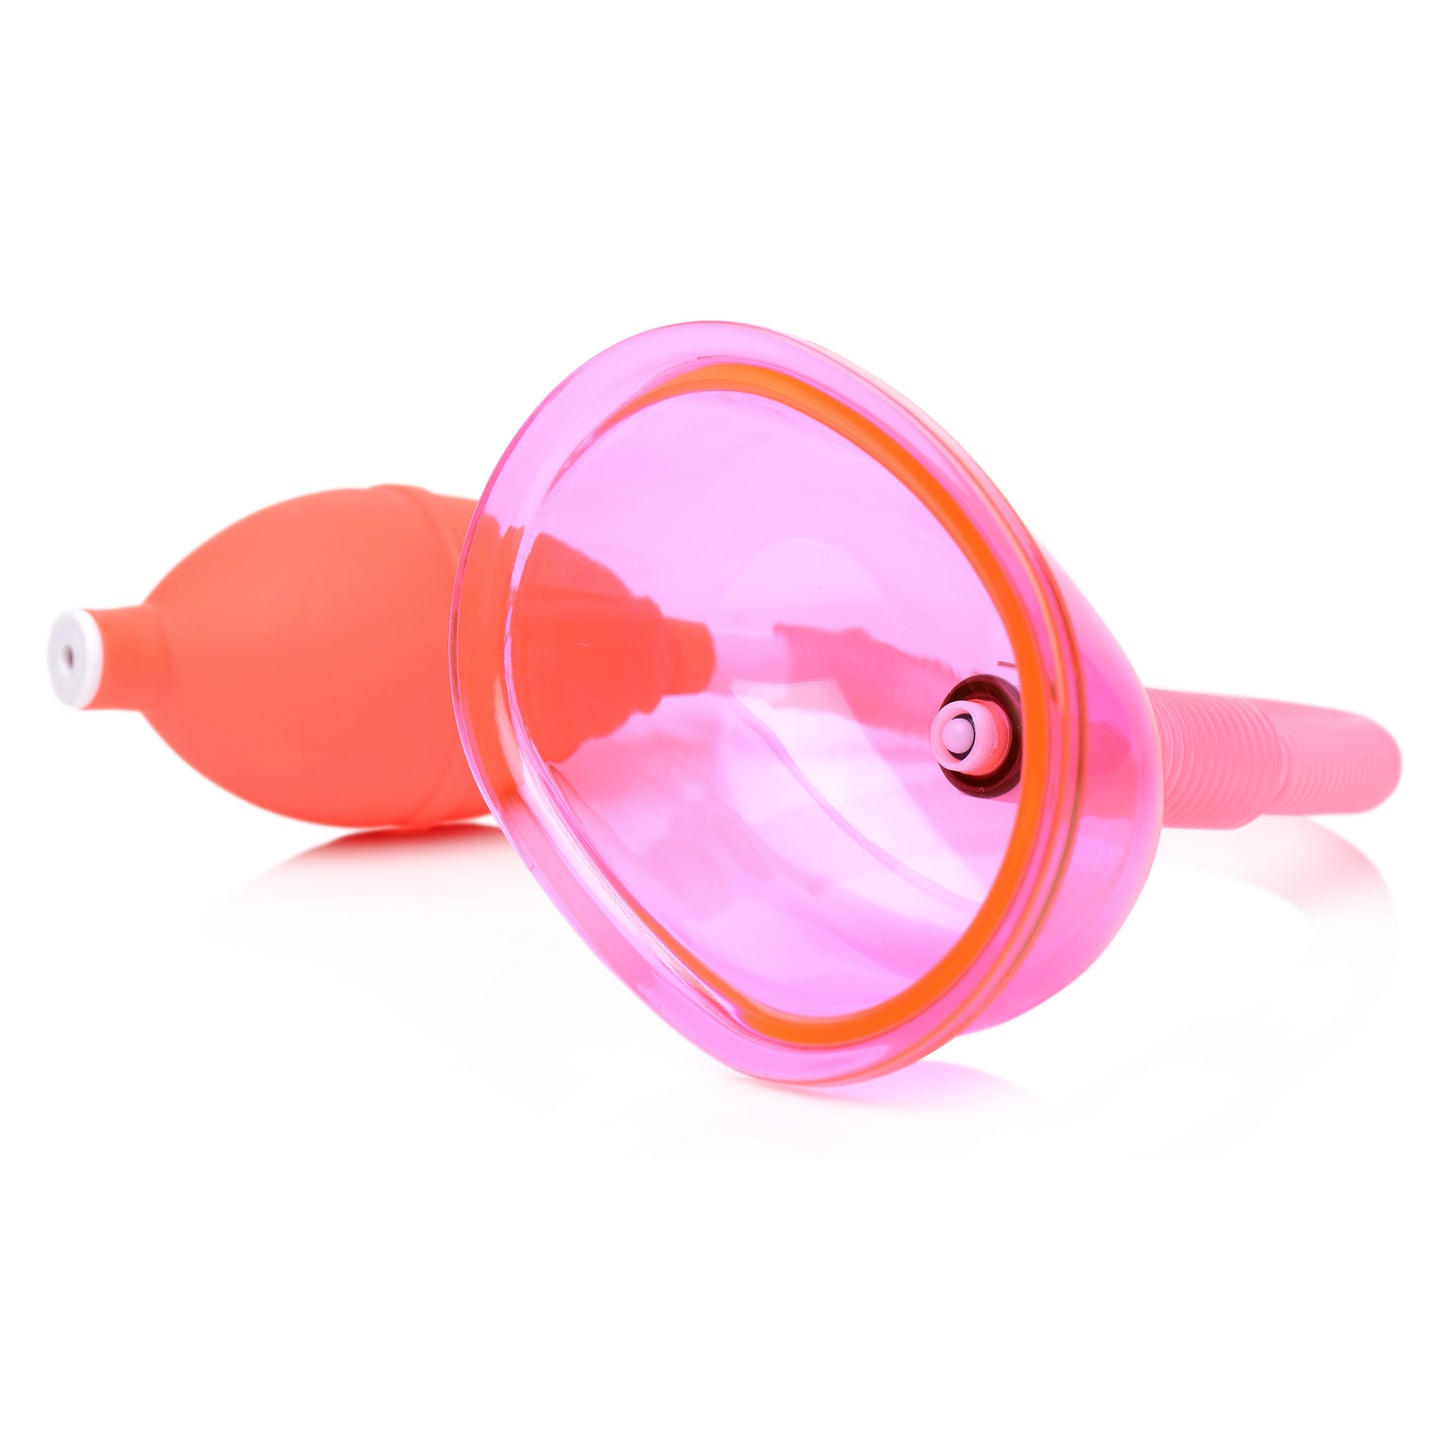 Vaginal Pump with 5 Inch Large Cup - UABDSM